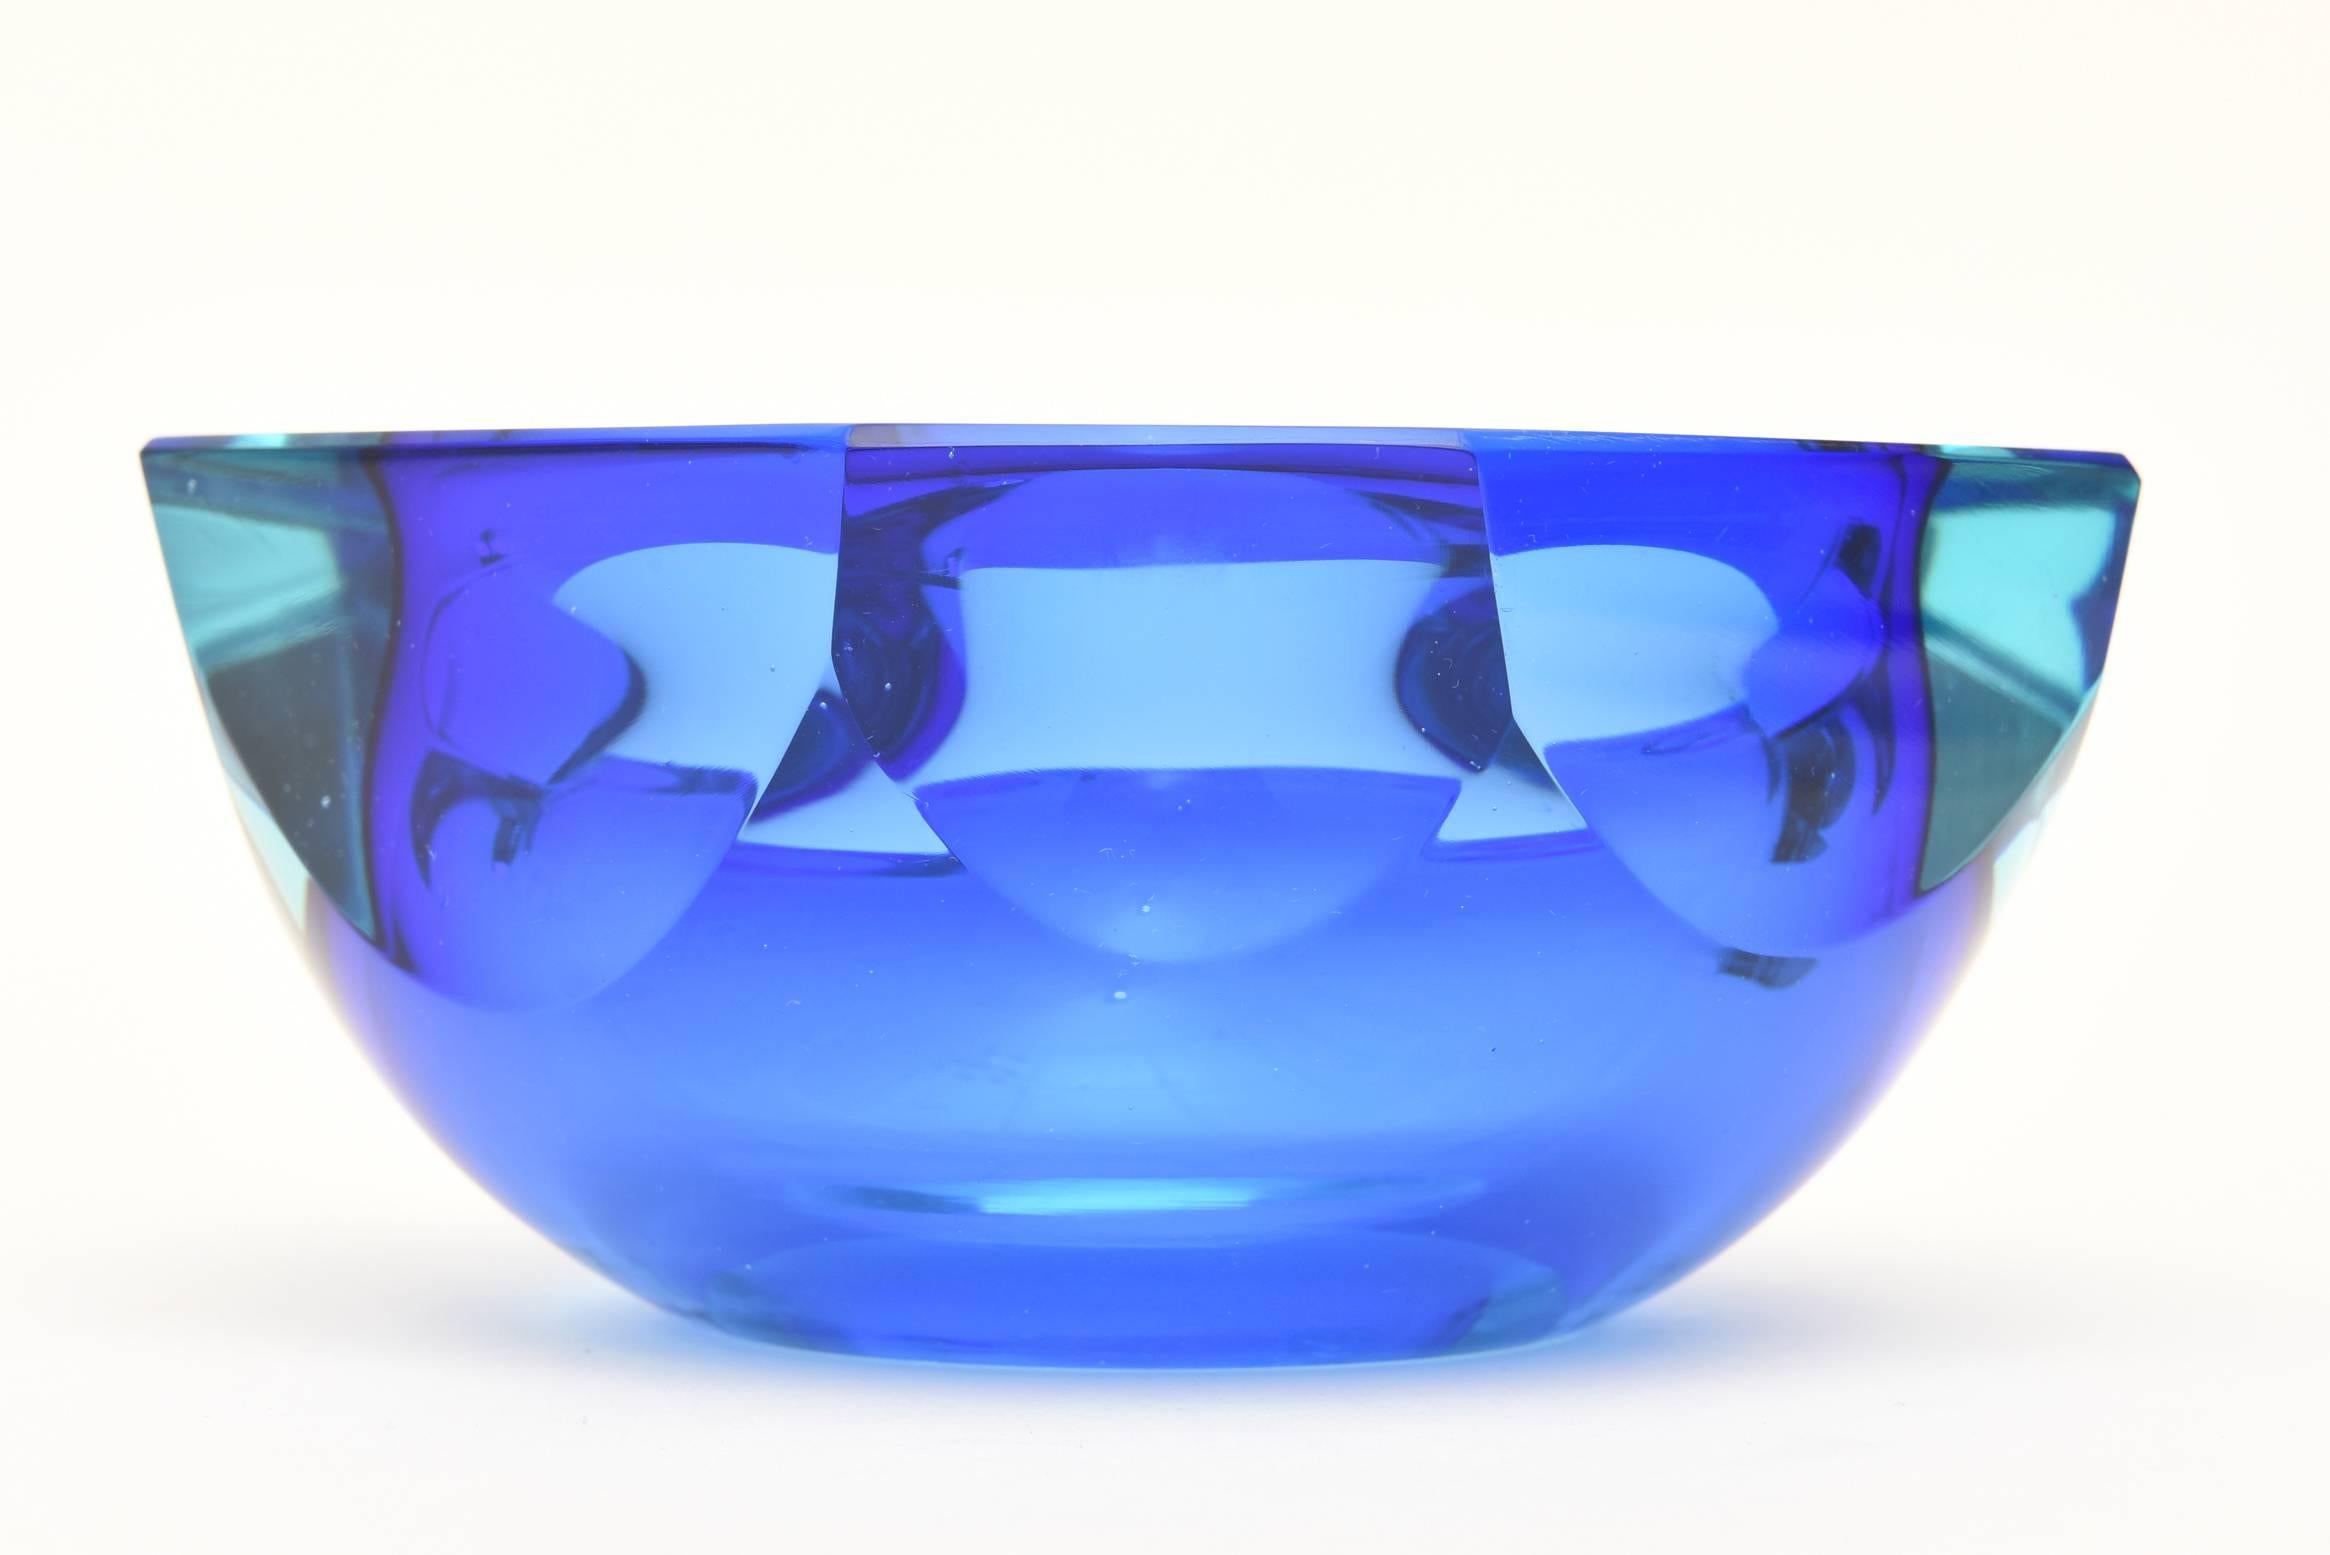 Italian Murano Sommerso Flat Cut Polished Geode Glass Bowl or Caviar Bowl 2